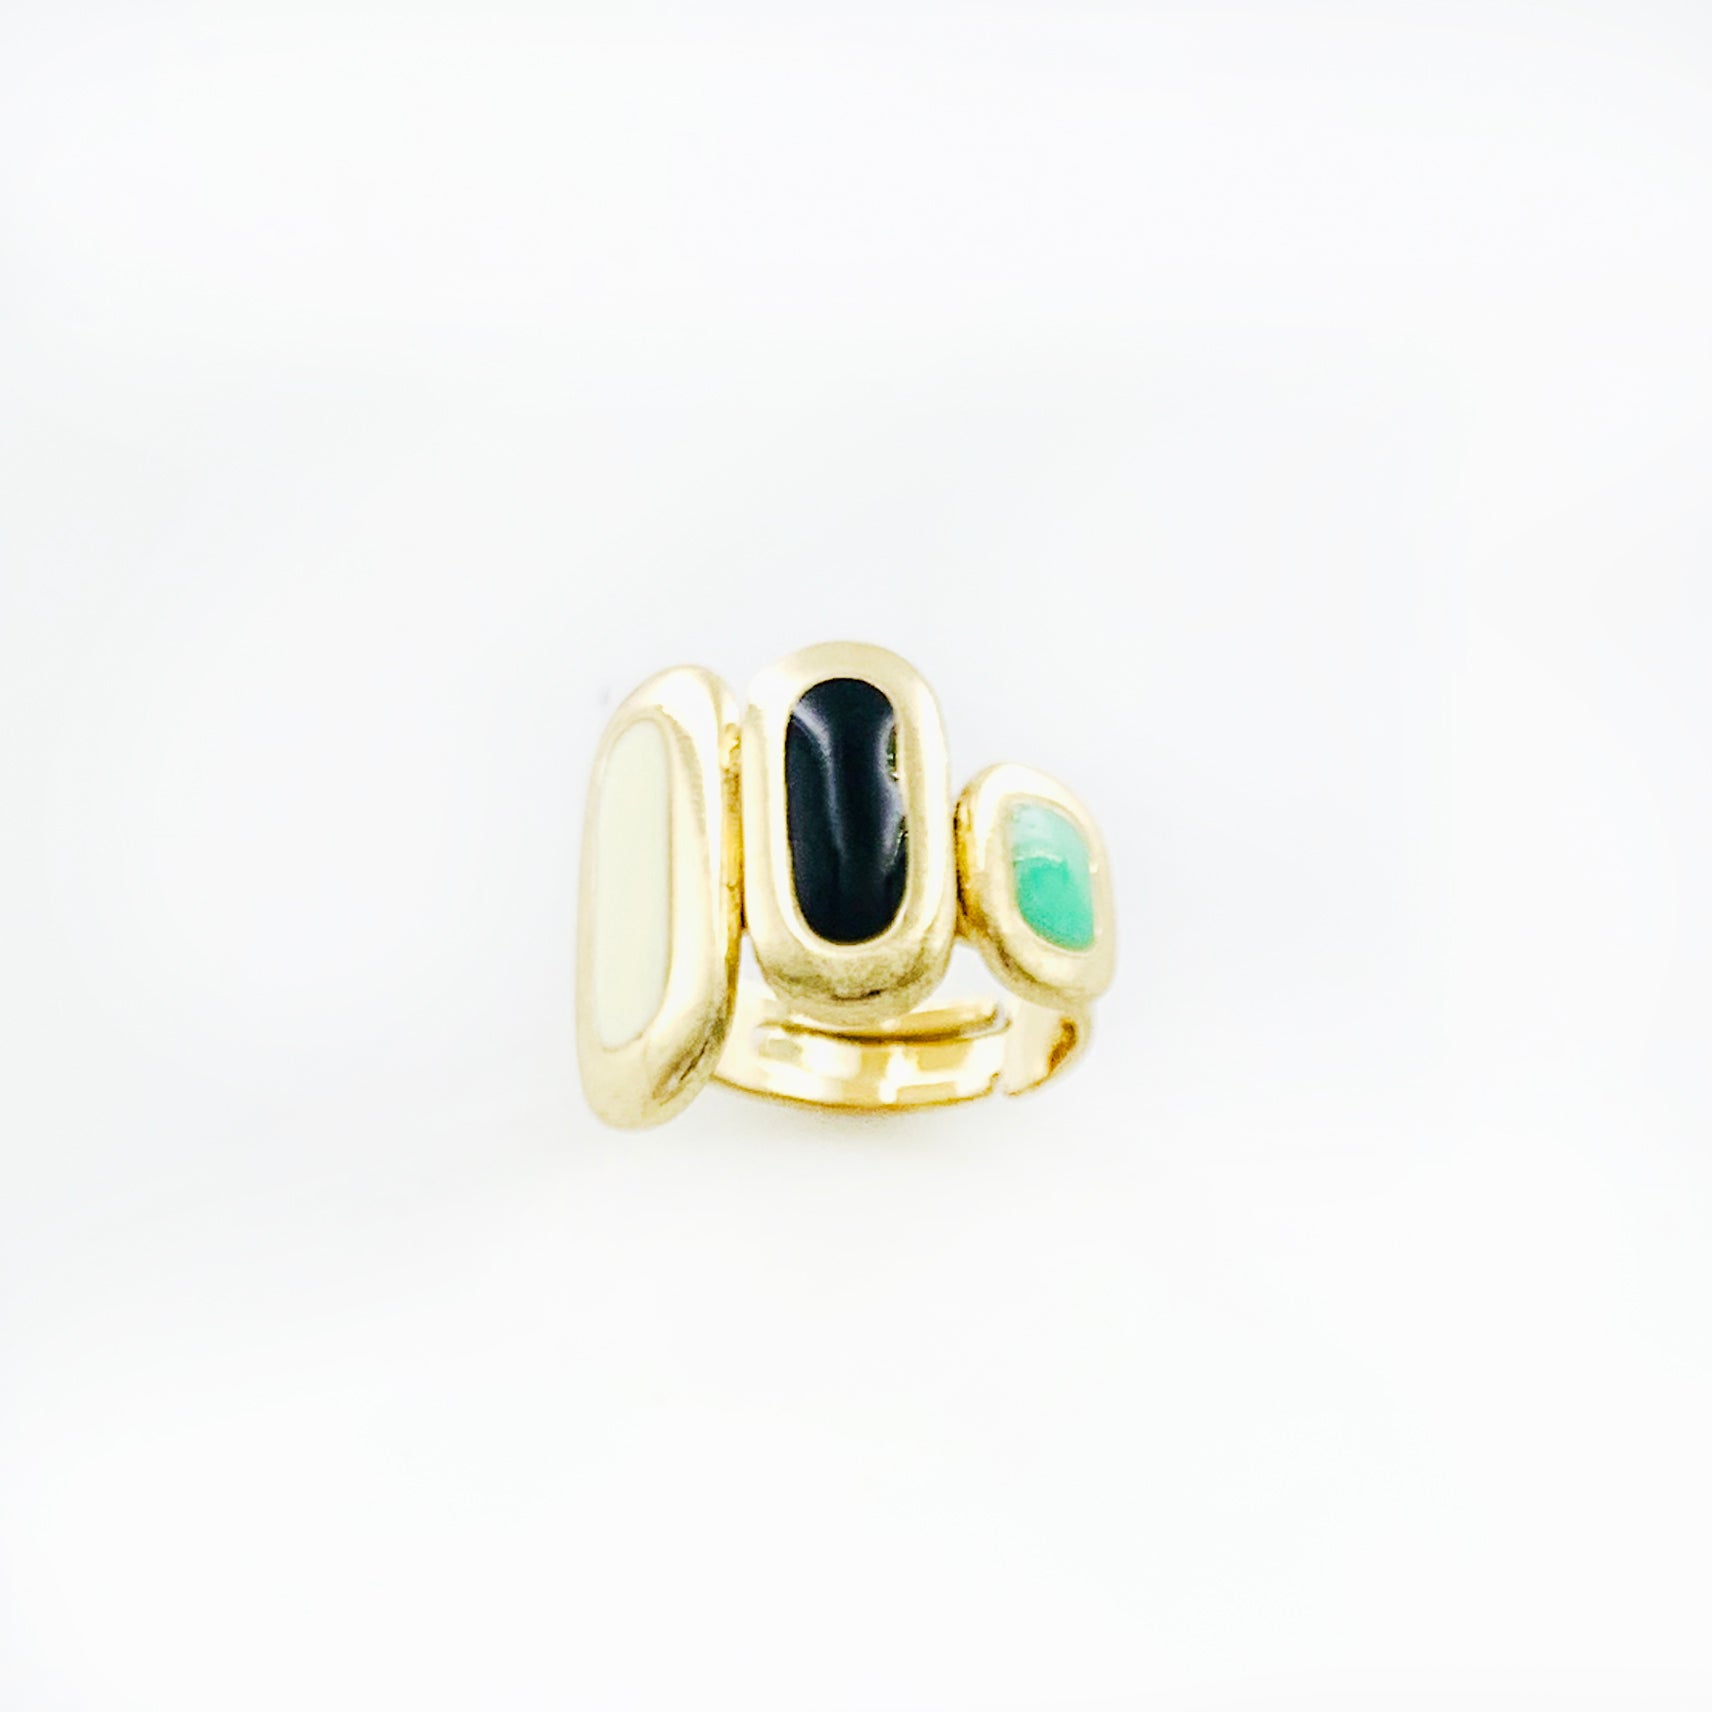 Gold ring with black, turquoise and white